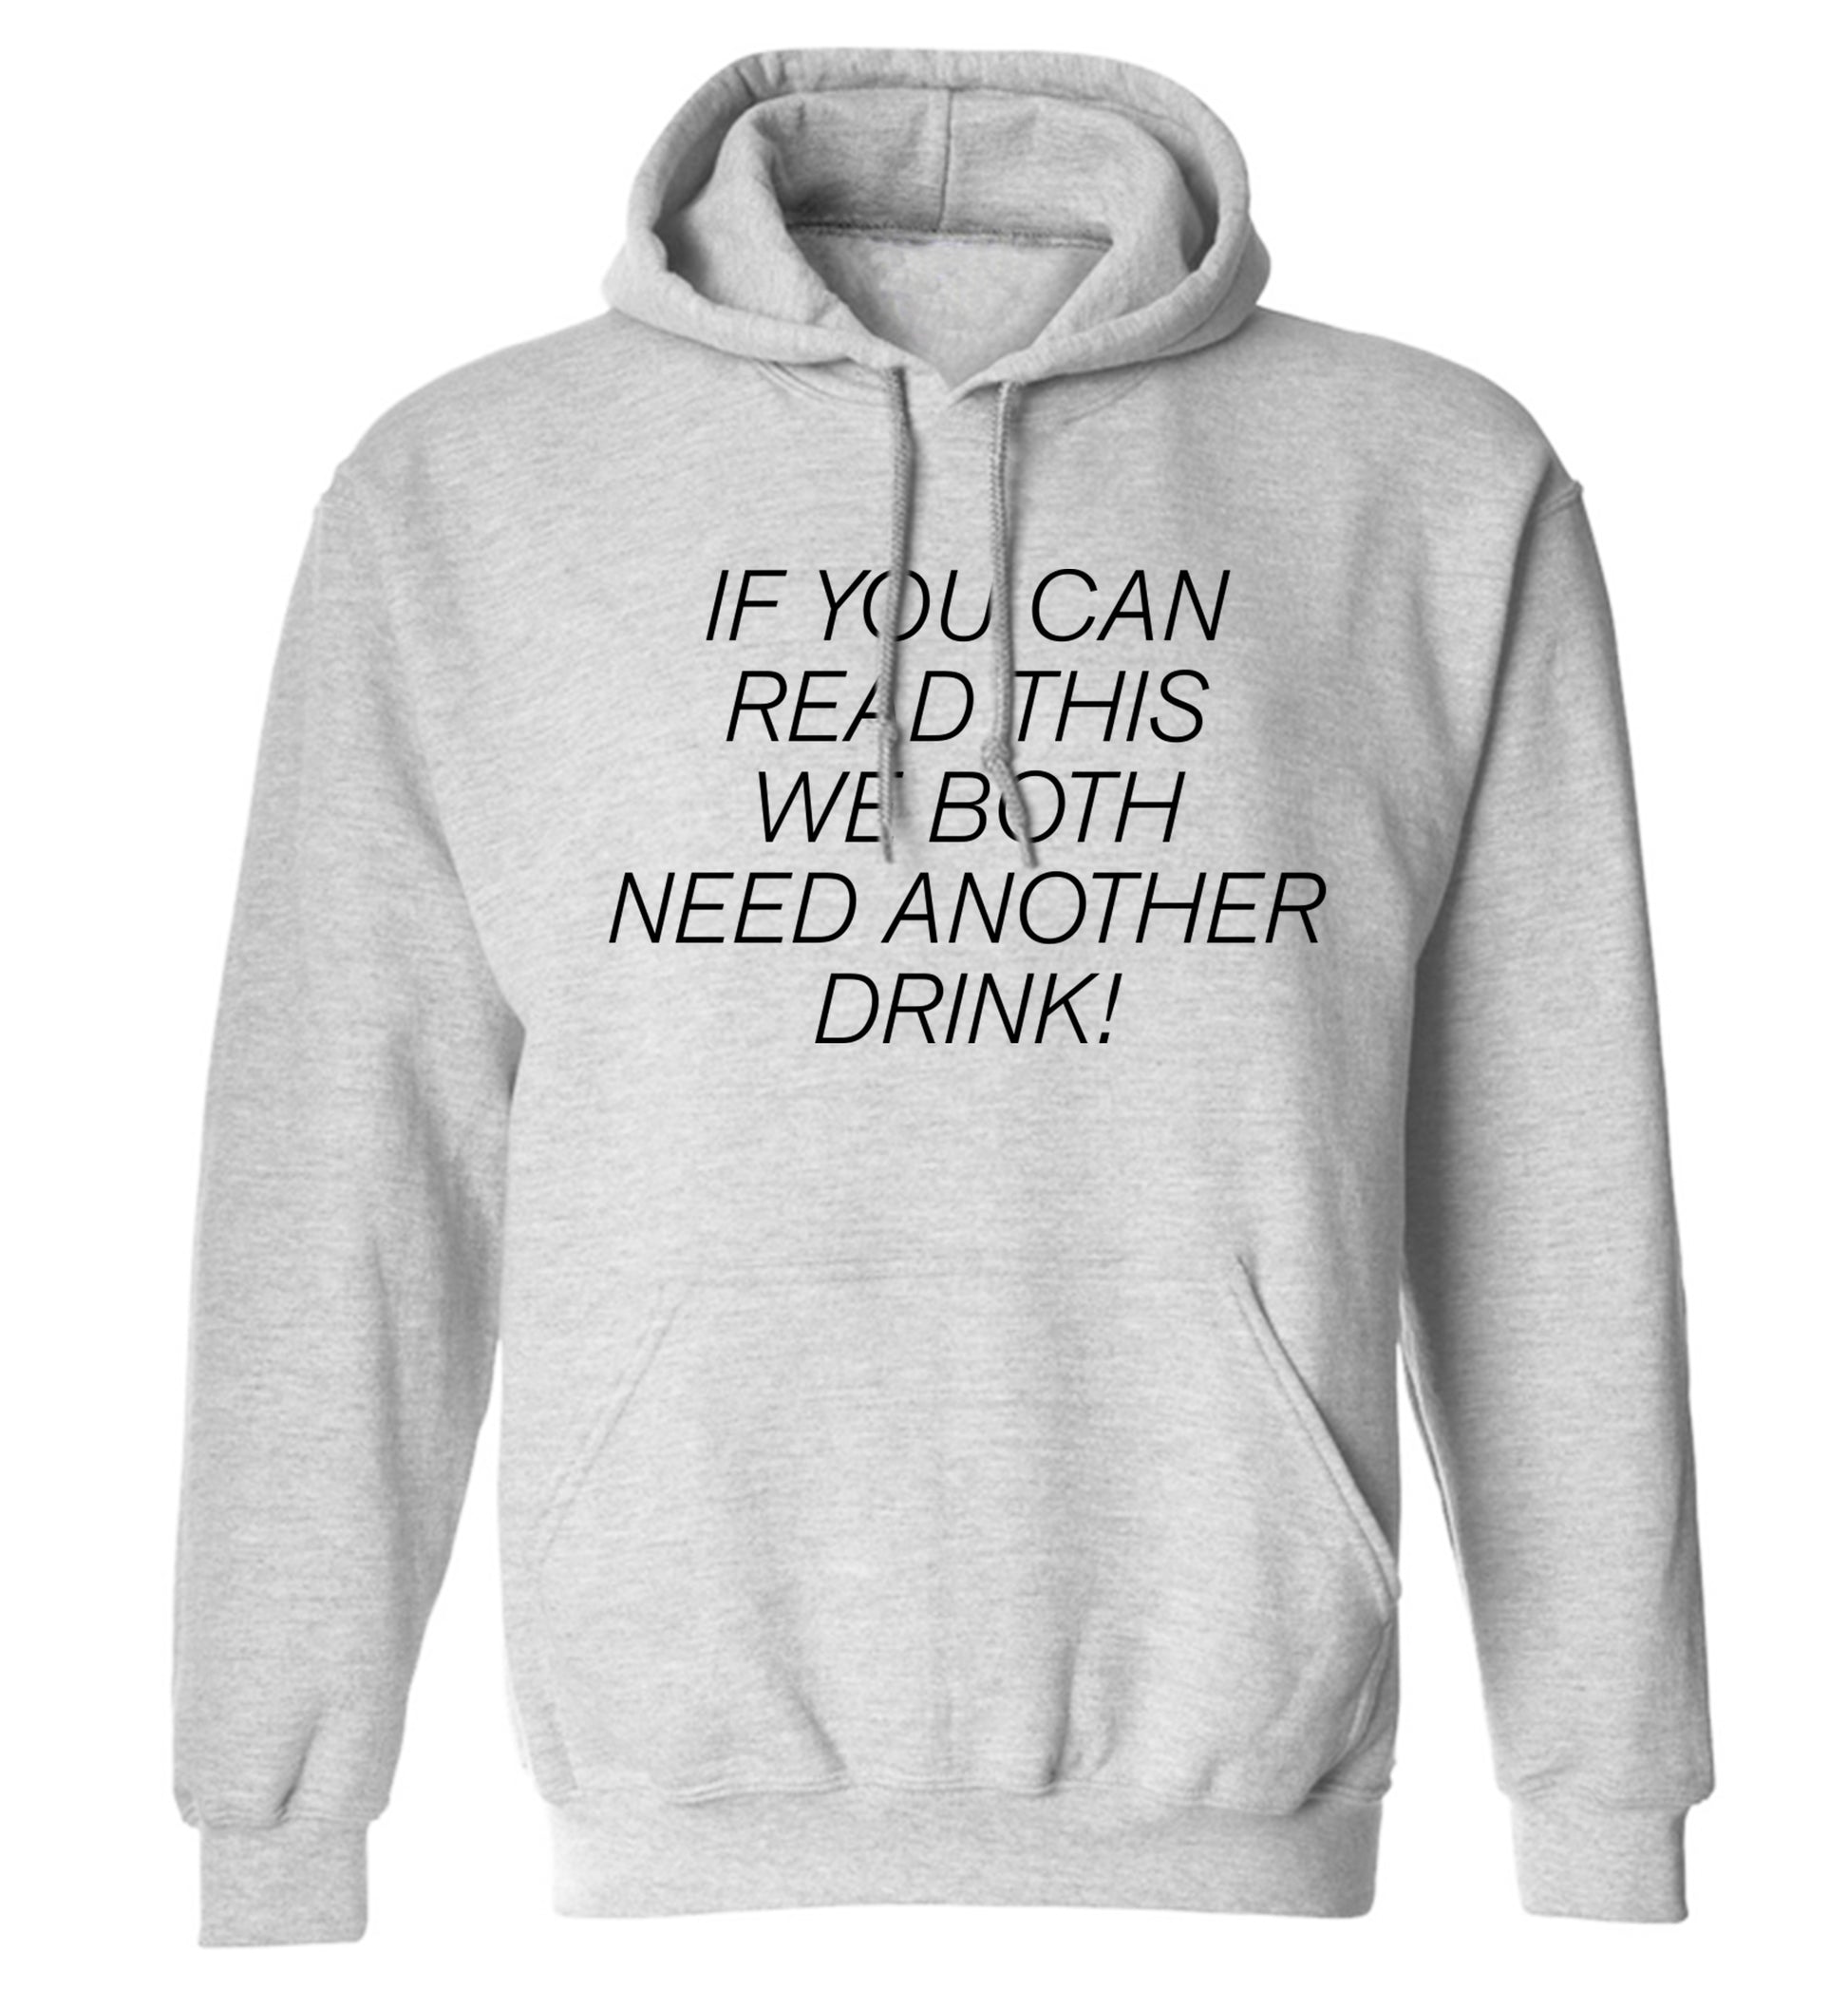 If you can read this we both need another drink! adults unisex grey hoodie 2XL